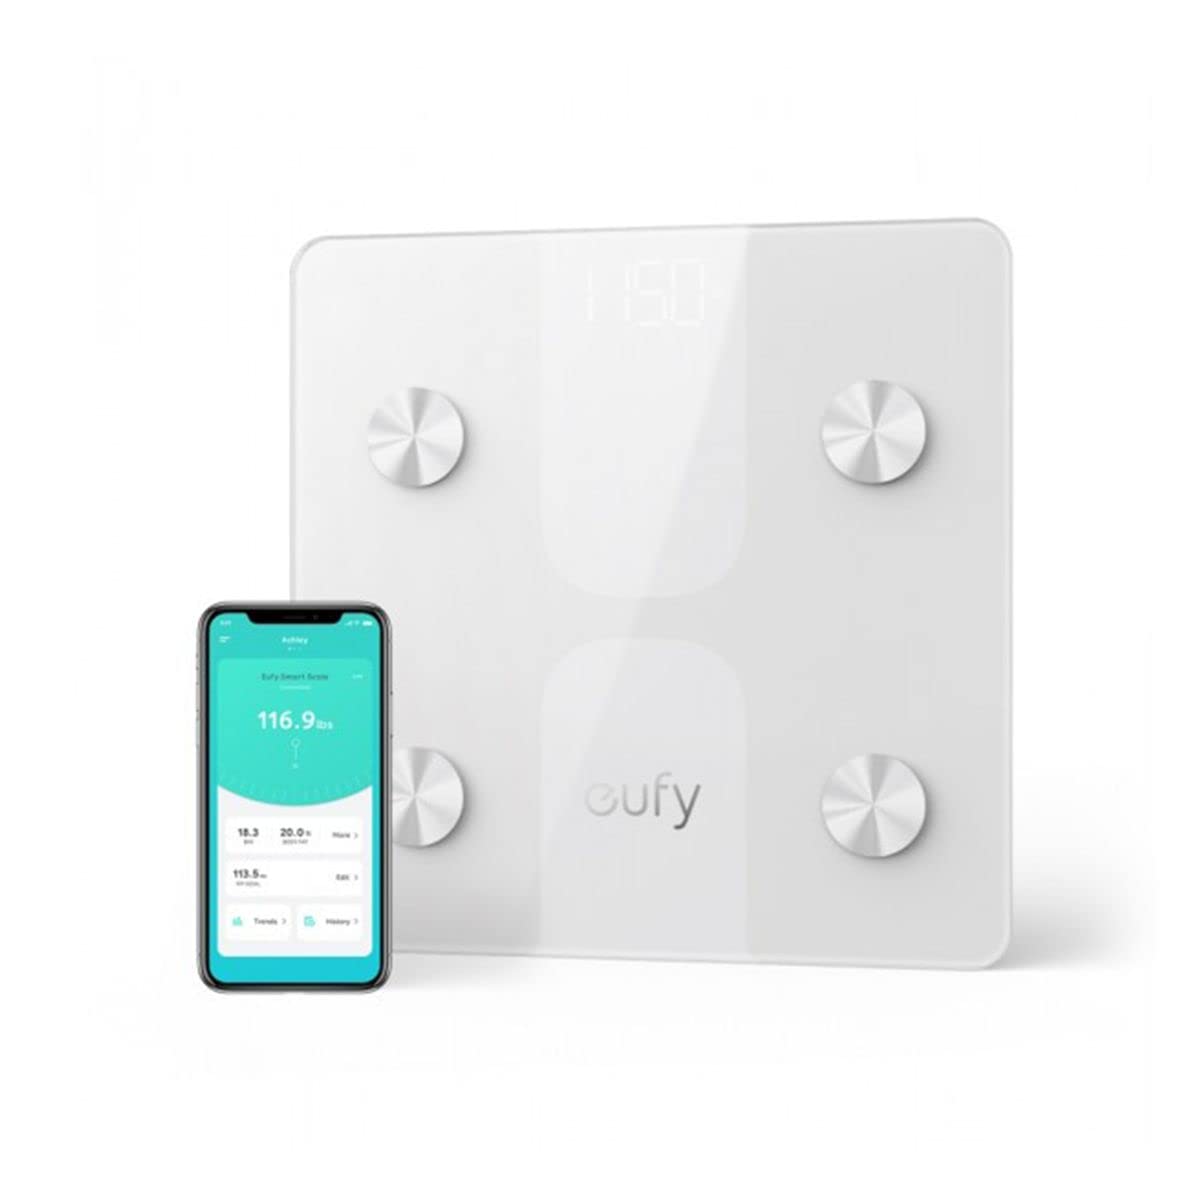 Anker Eufy Smart Scale C1 with Bluetooth, Fitness Body Composition Analysis